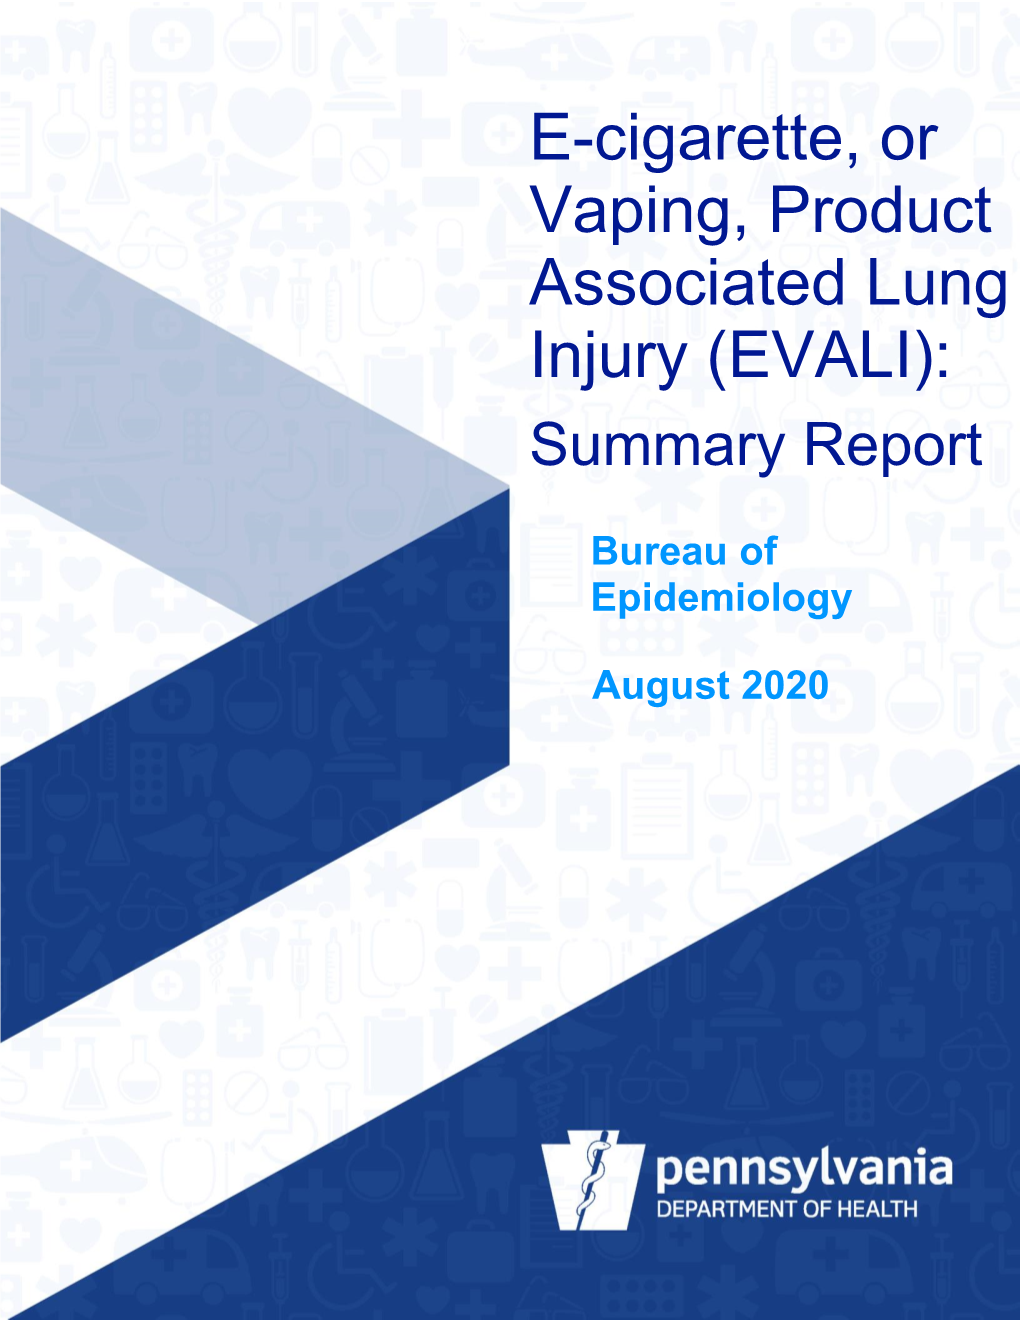 E-Cigarette, Or Vaping, Product Associated Lung Injury (EVALI): Summary Report